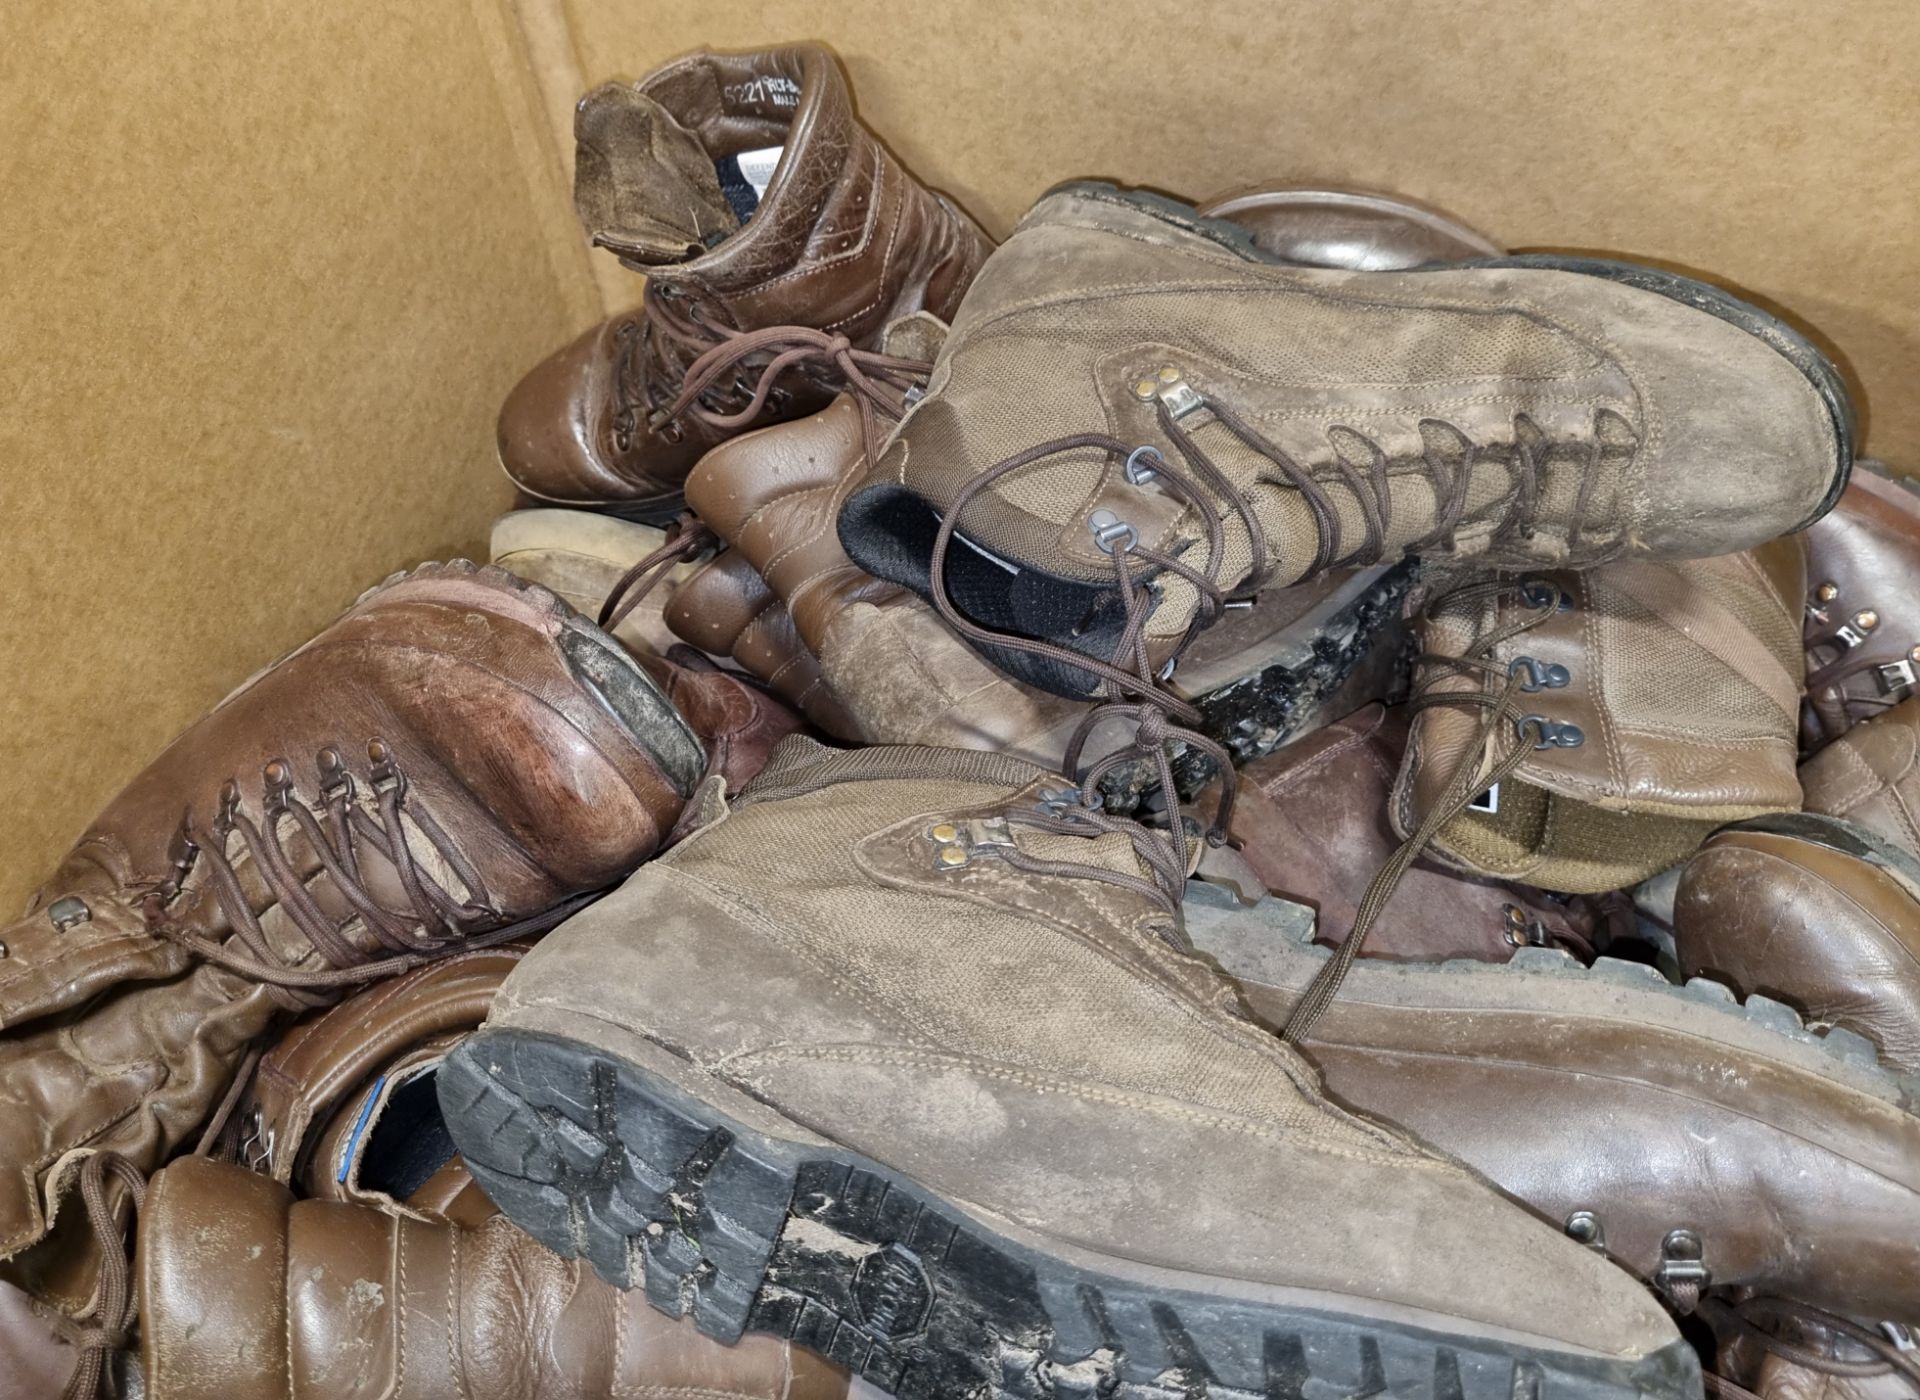 50x pairs of Various Boots including Magnum, Iturri & YDS - mixed grades and sizes - Image 2 of 5